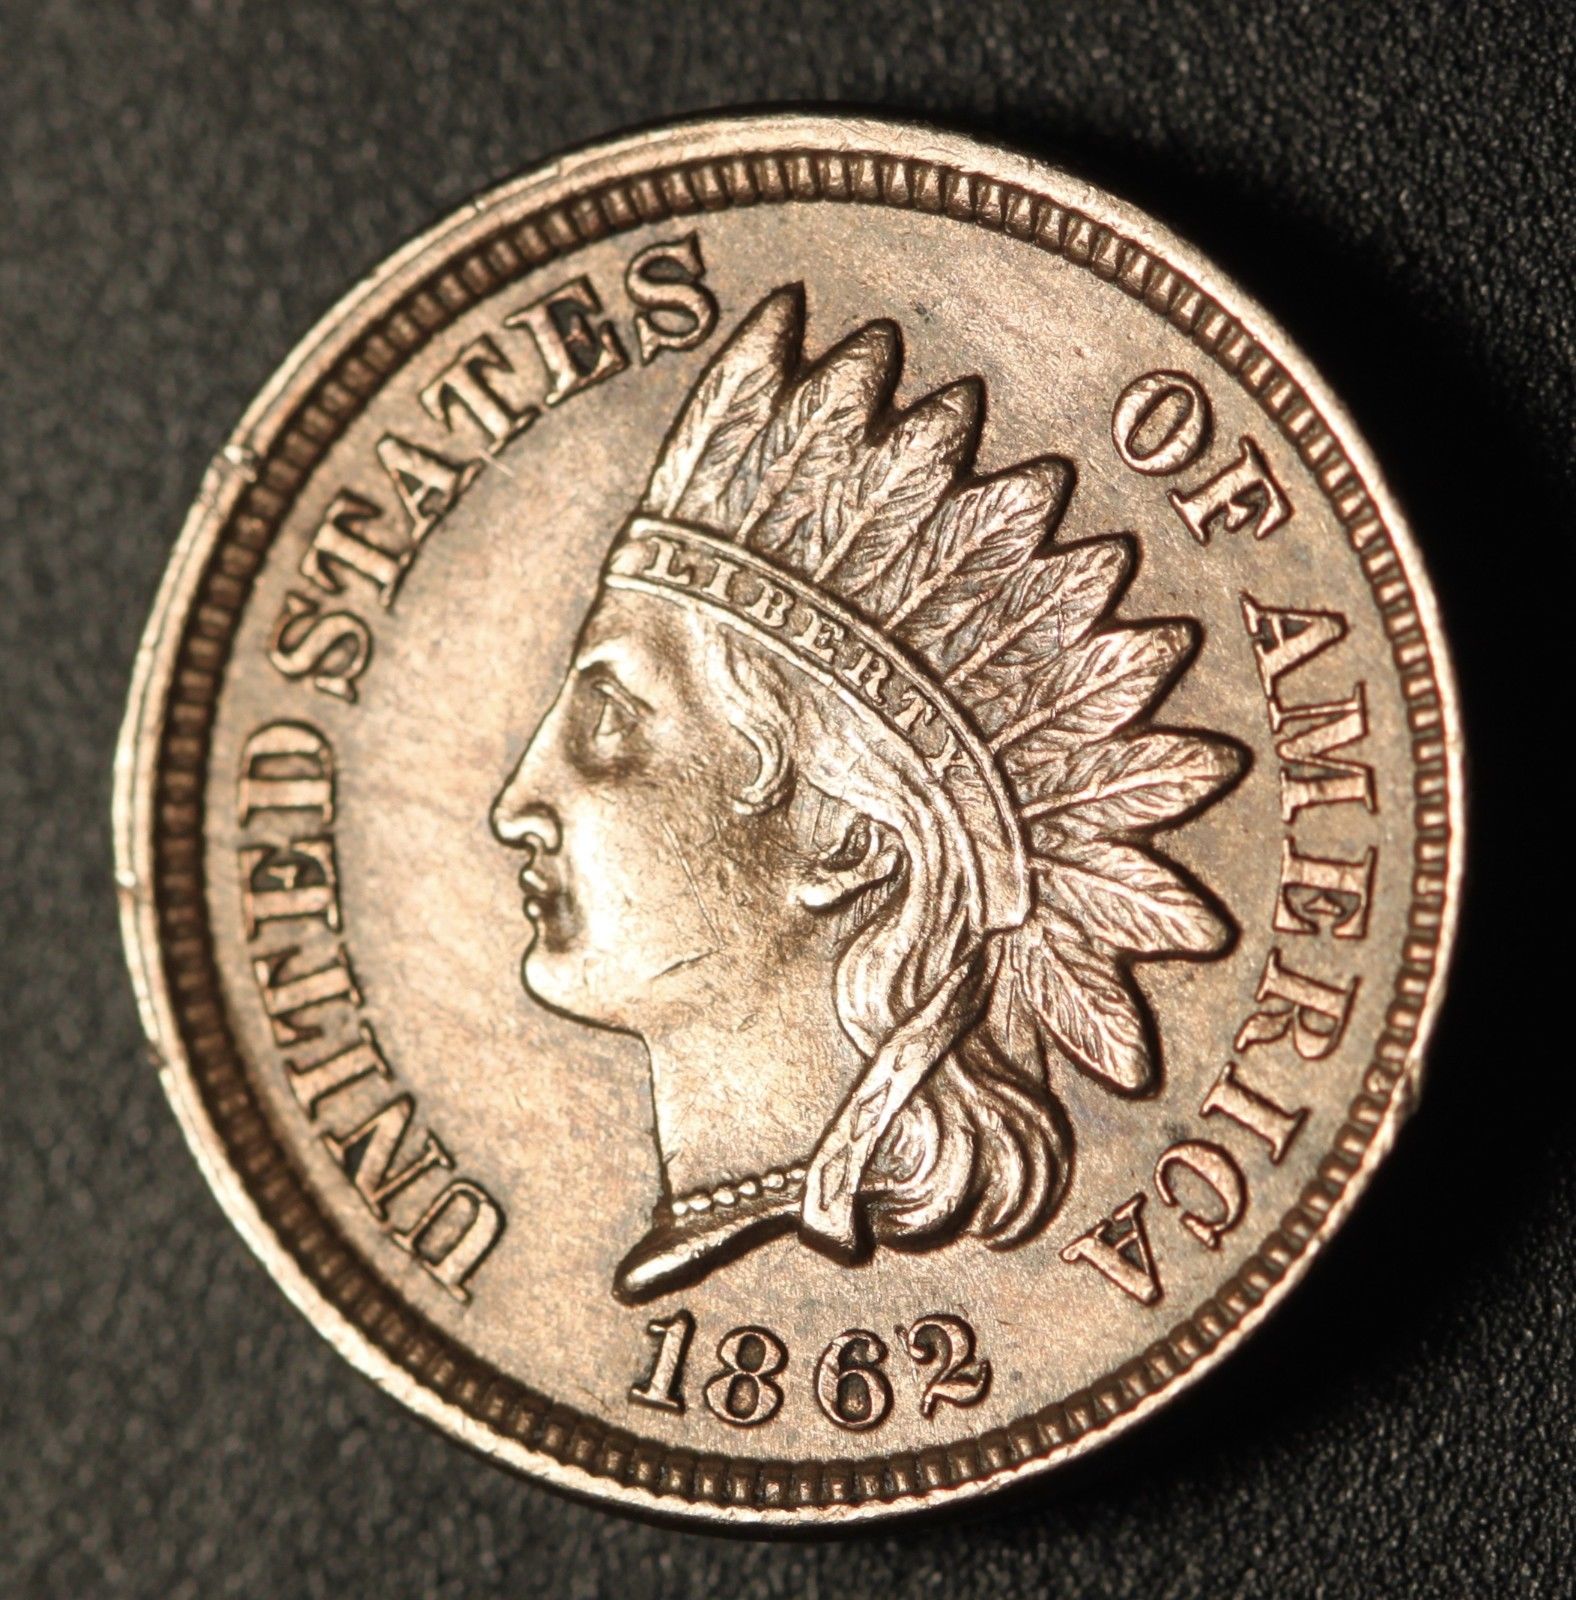 1862 ODD-003 - Indian Head Penny - Photo by Ed Nathanson